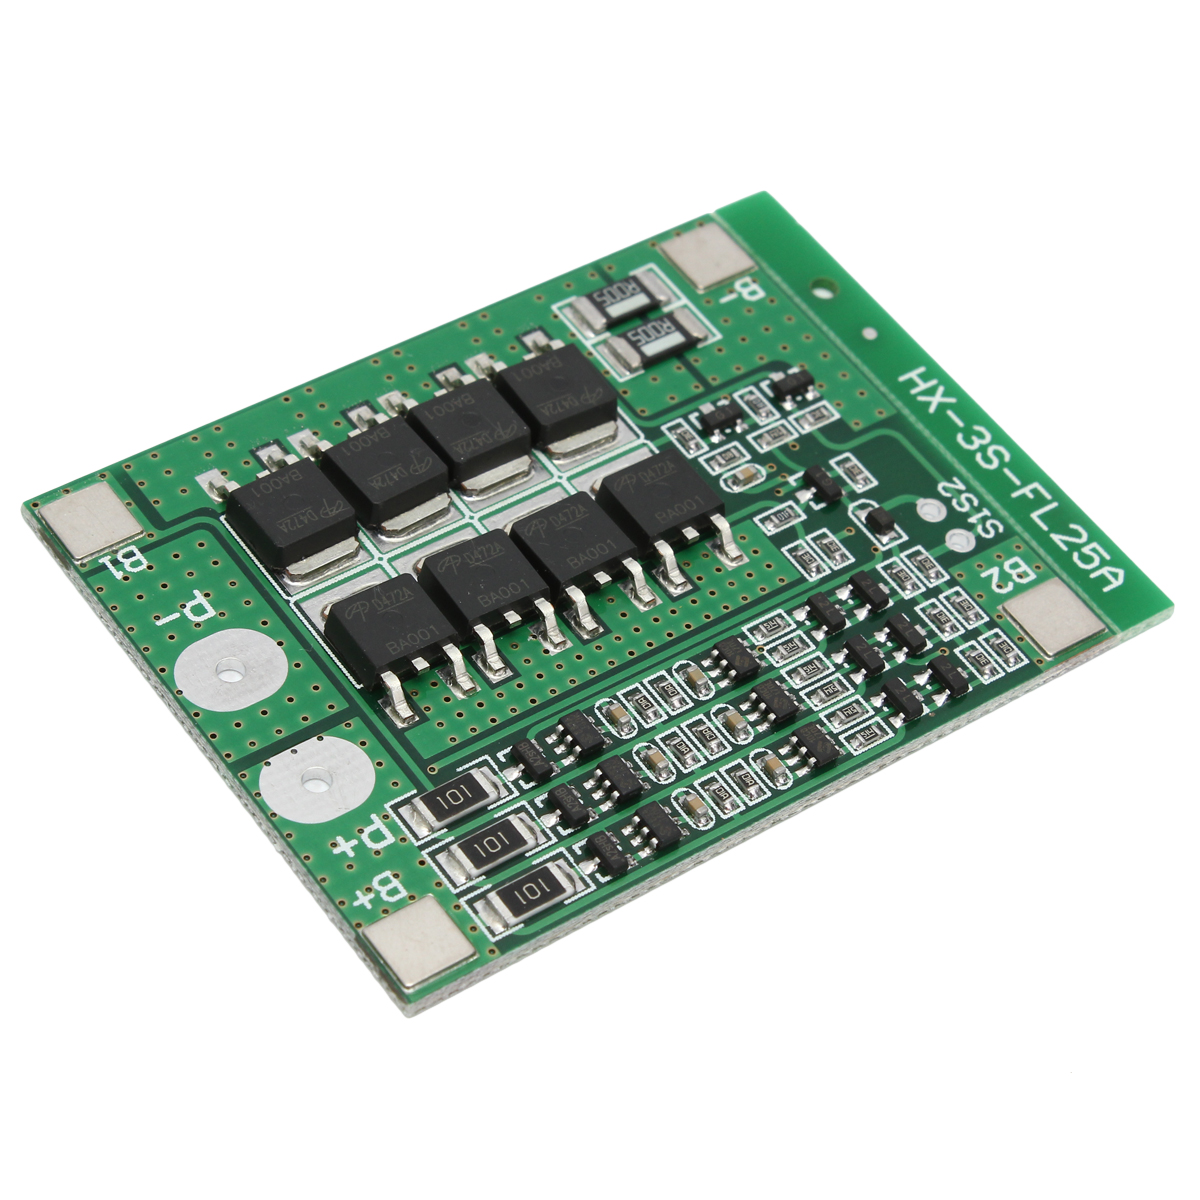 3pcs-3S-111V-25A-18650-Li-ion-Lithium-Battery-BMS-Protection-PCB-Board-With-Balance-Function-1314027